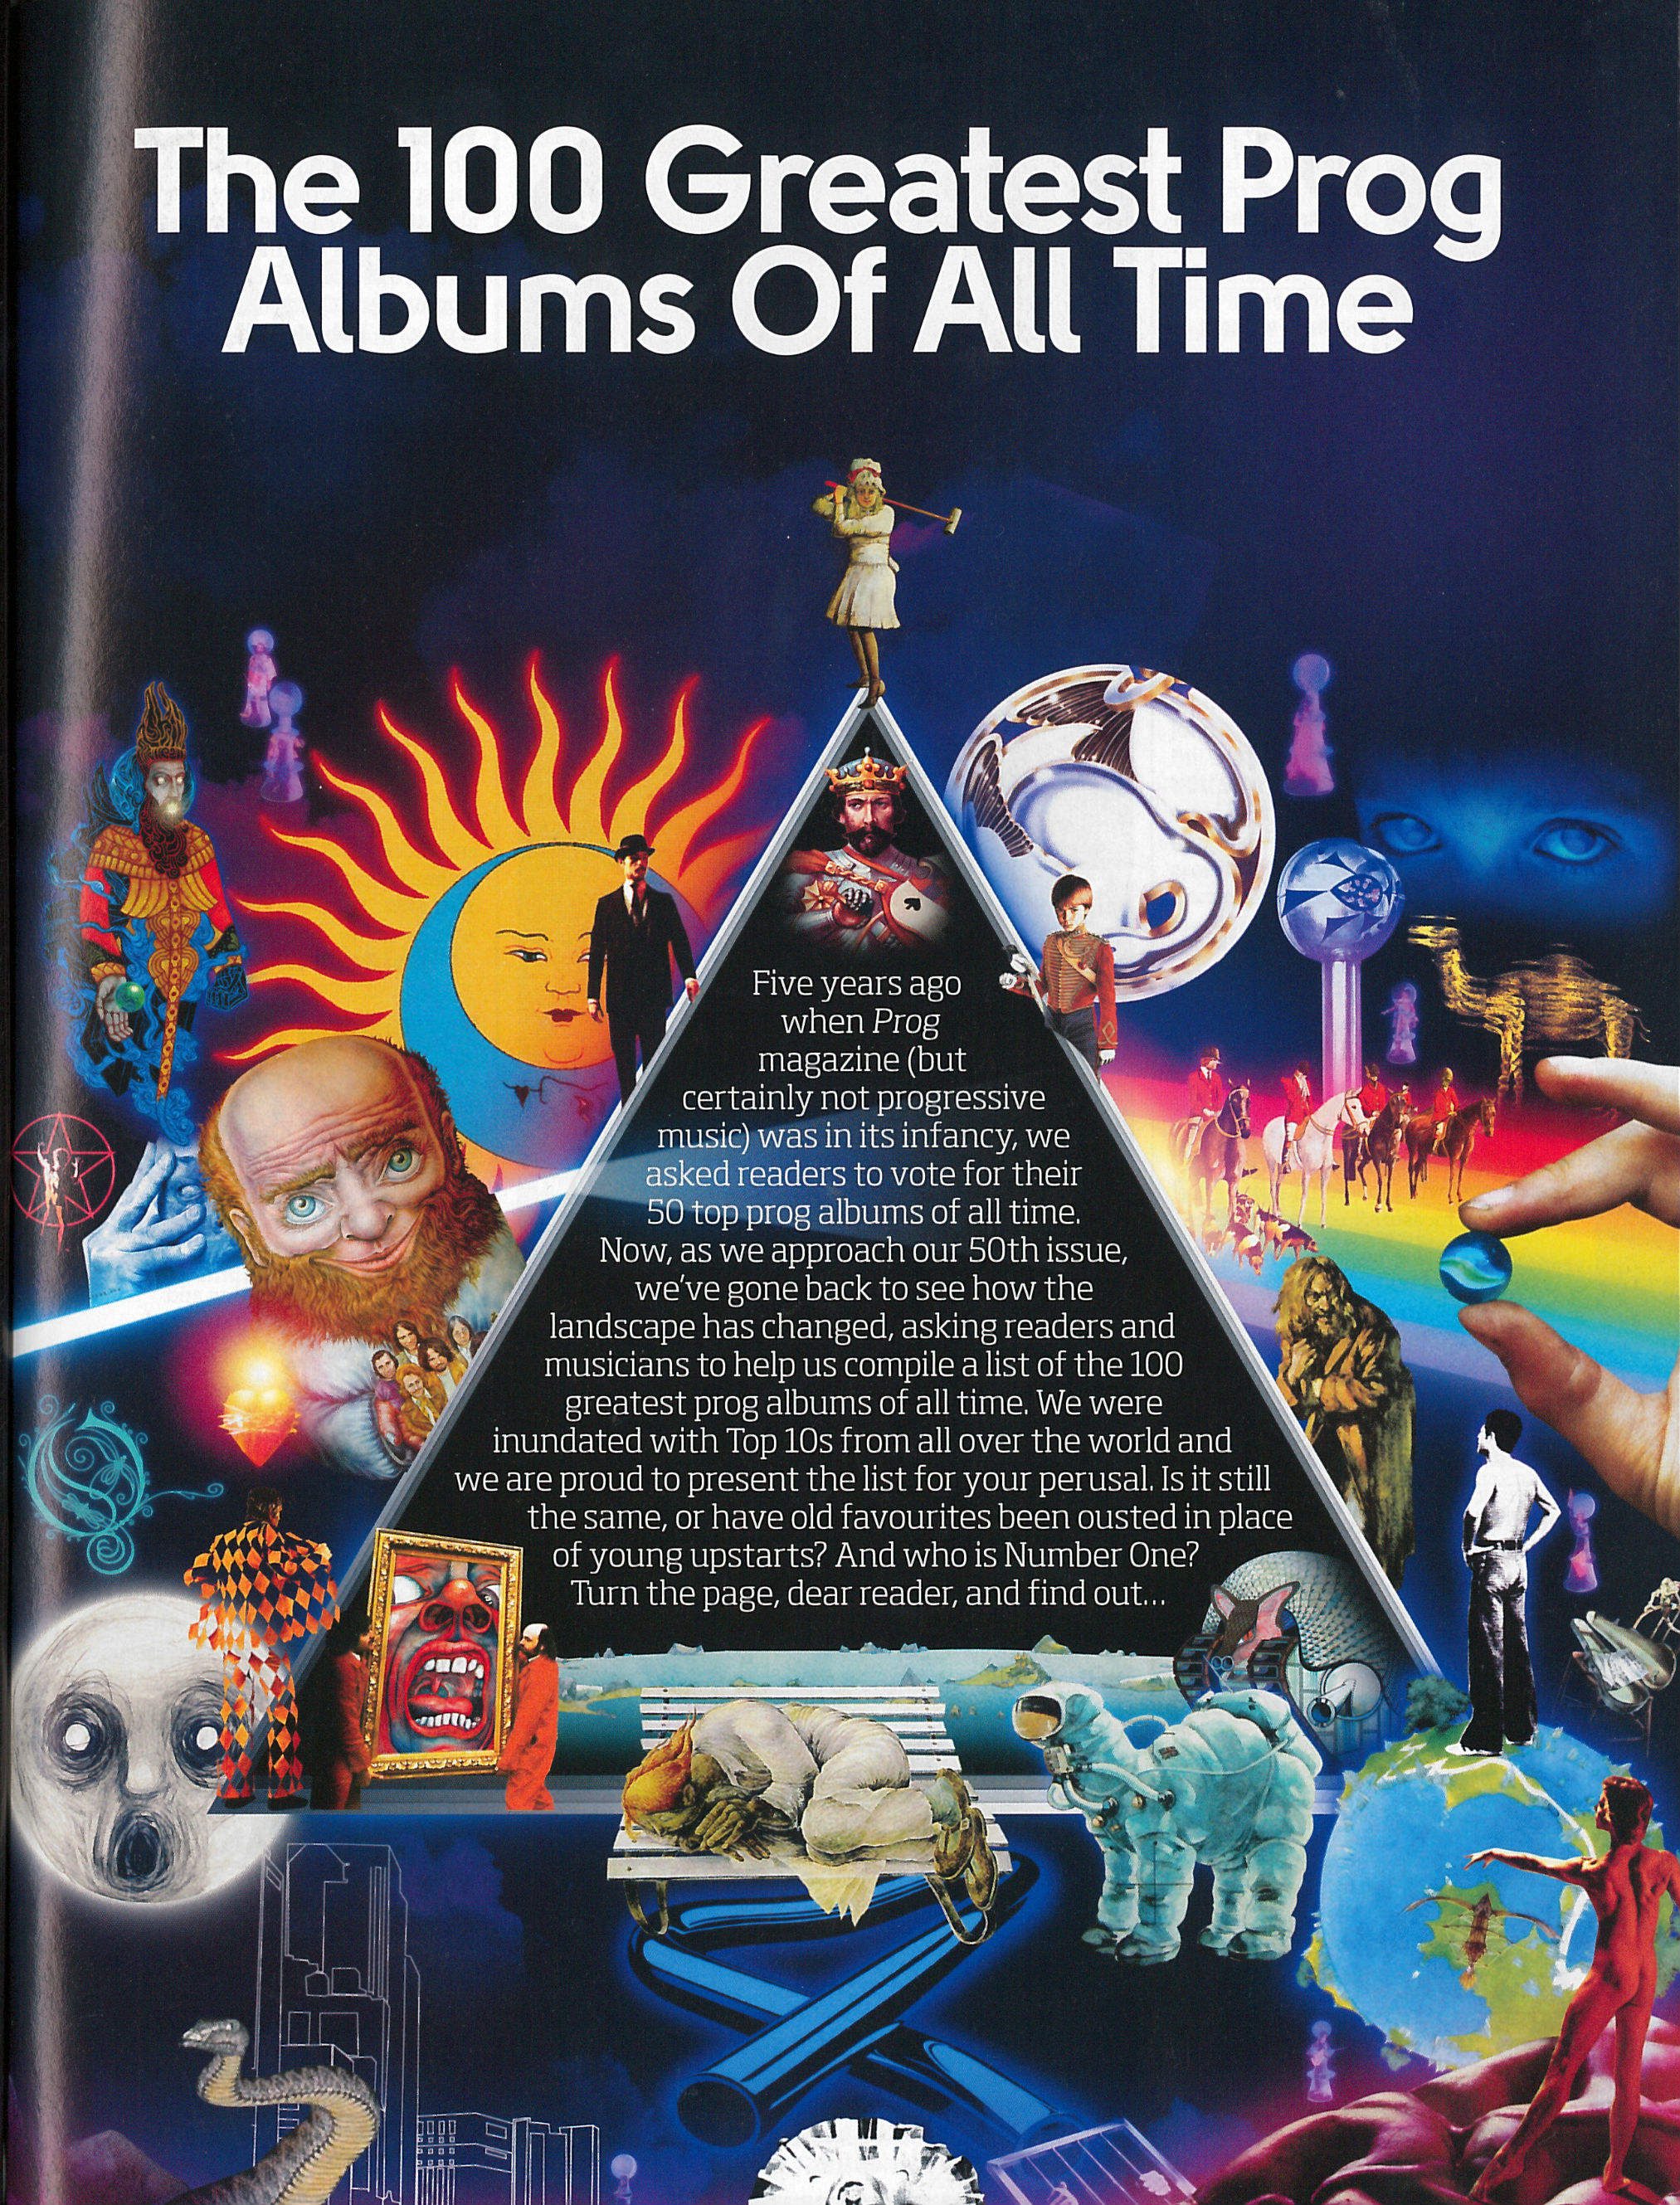 The 100 Greatest Prog Albums of All Time - PROG Magazine - August 2014